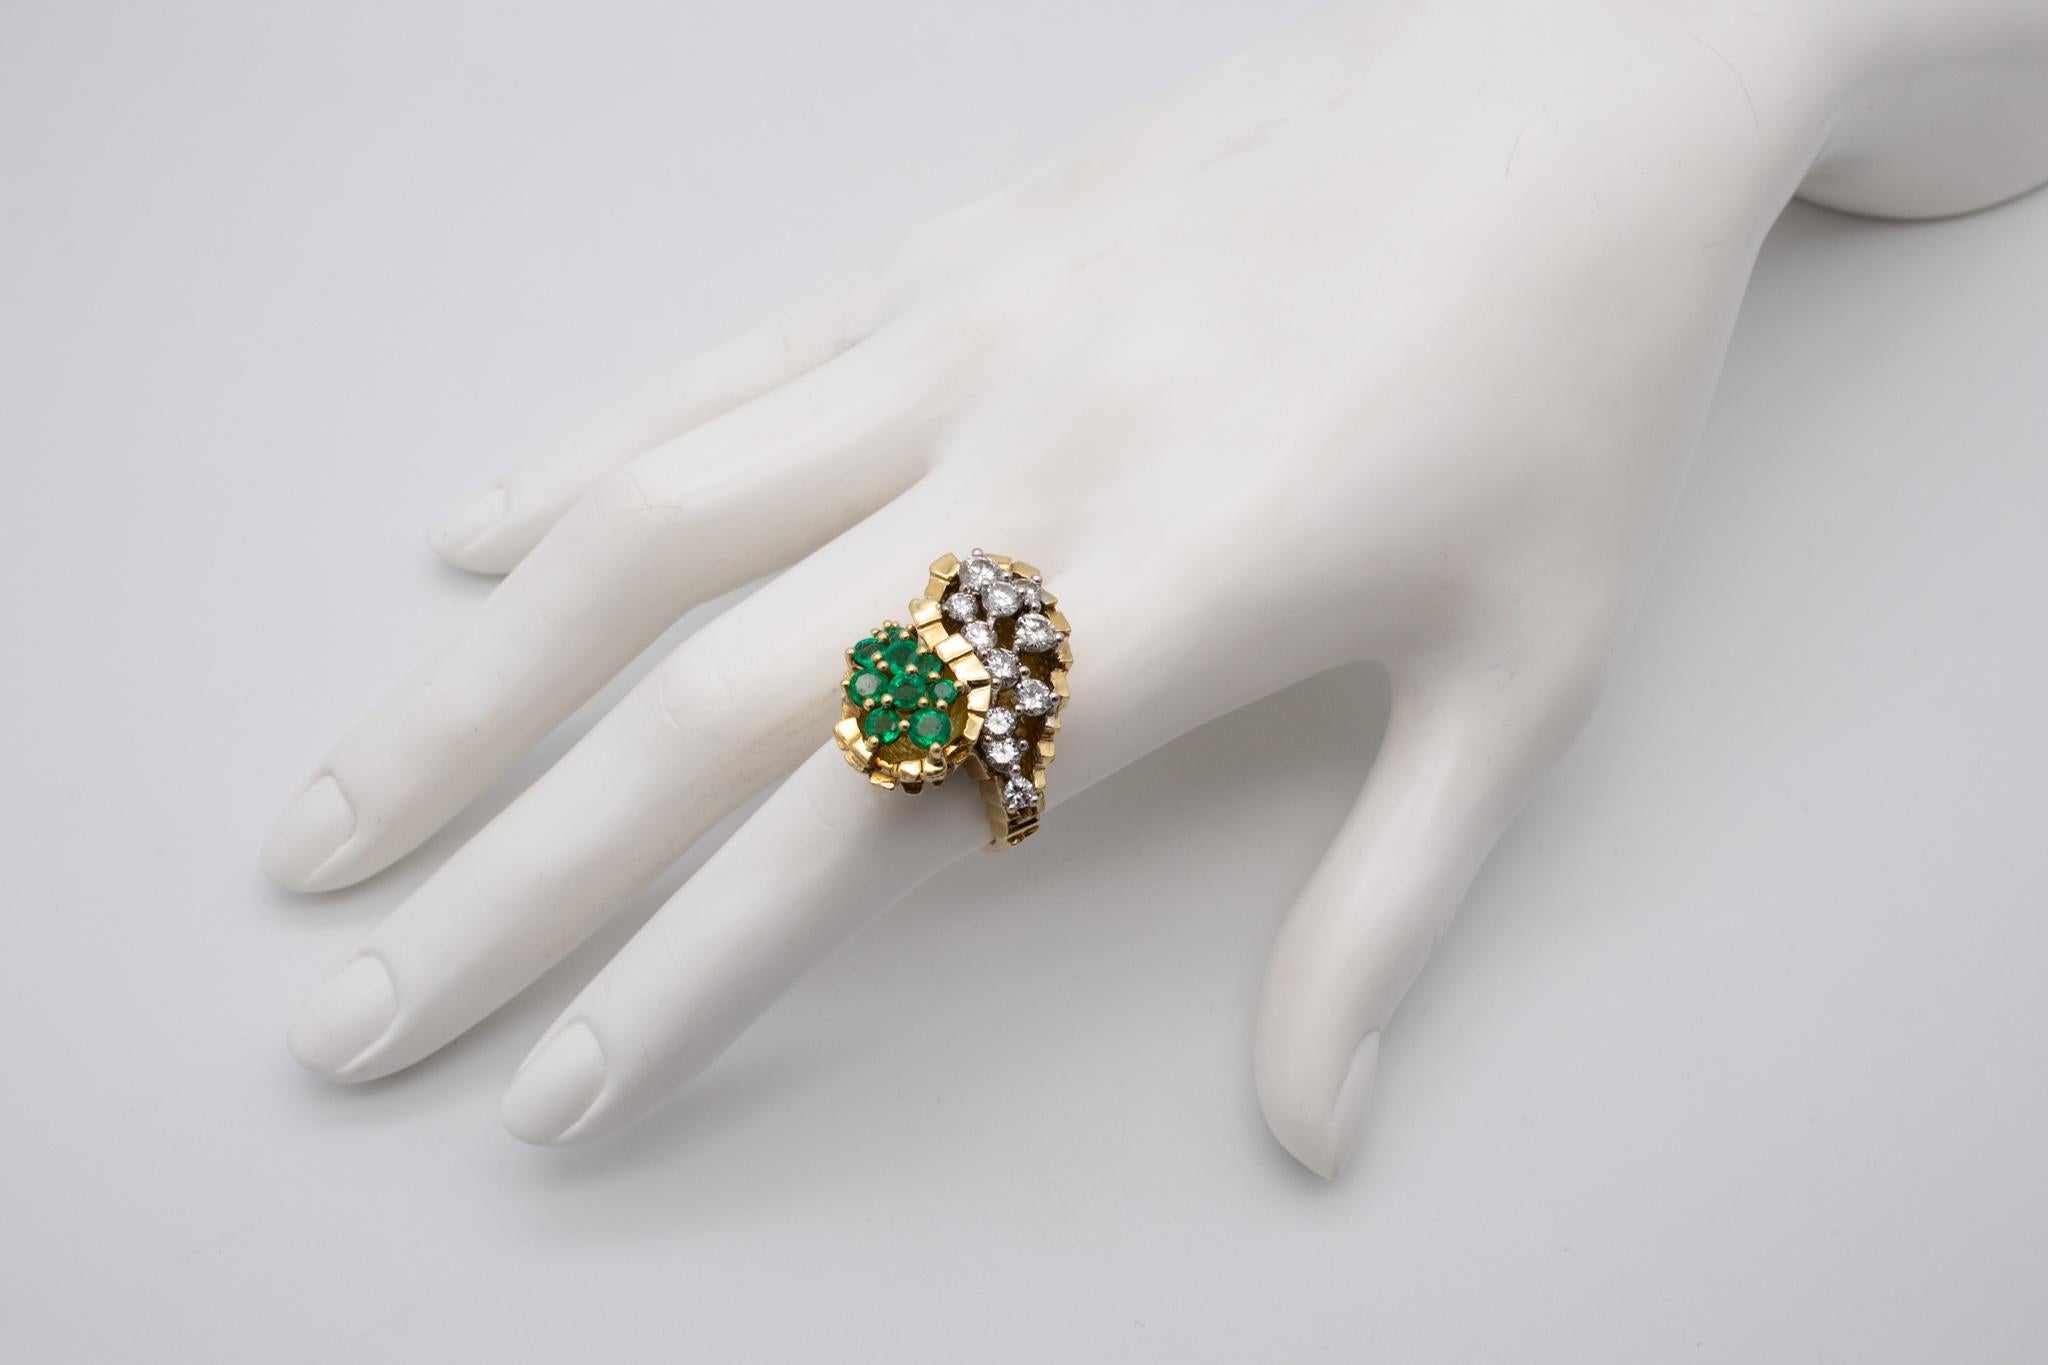 An exceptional modernist jeweled Cocktail Ring.

Very bold and unique oversized piece created in the early 1970's. This ring has been crafted, with a geometric stepped patterns in solid yellow gold of 18 karats, with very high polished